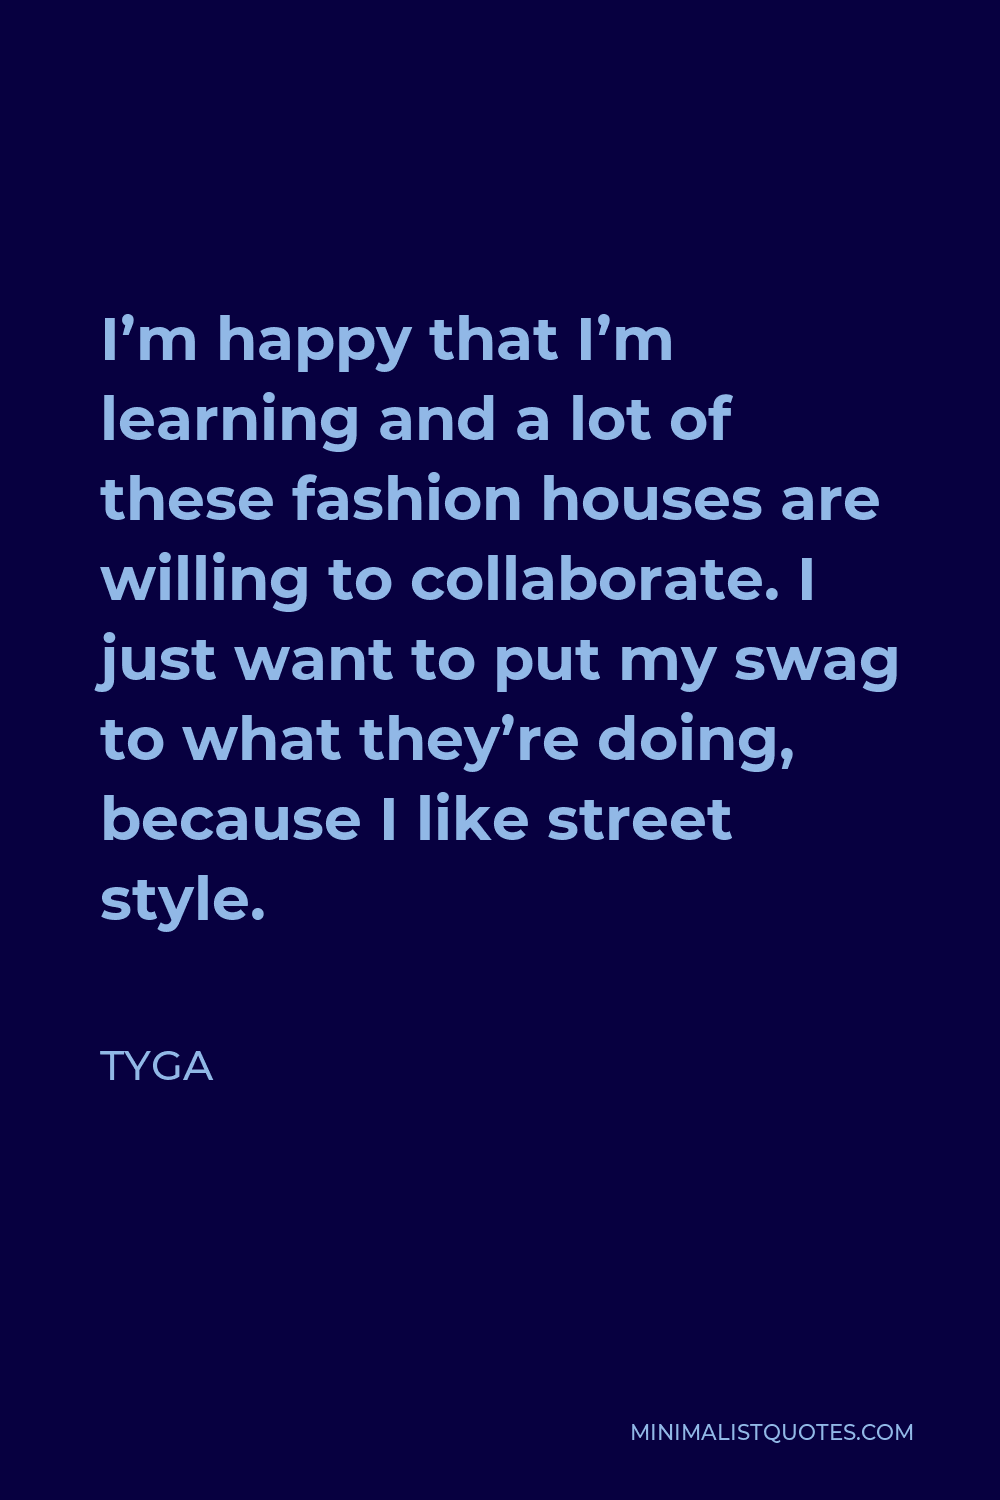 Tyga Quote - I’m happy that I’m learning and a lot of these fashion houses are willing to collaborate. I just want to put my swag to what they’re doing, because I like street style.